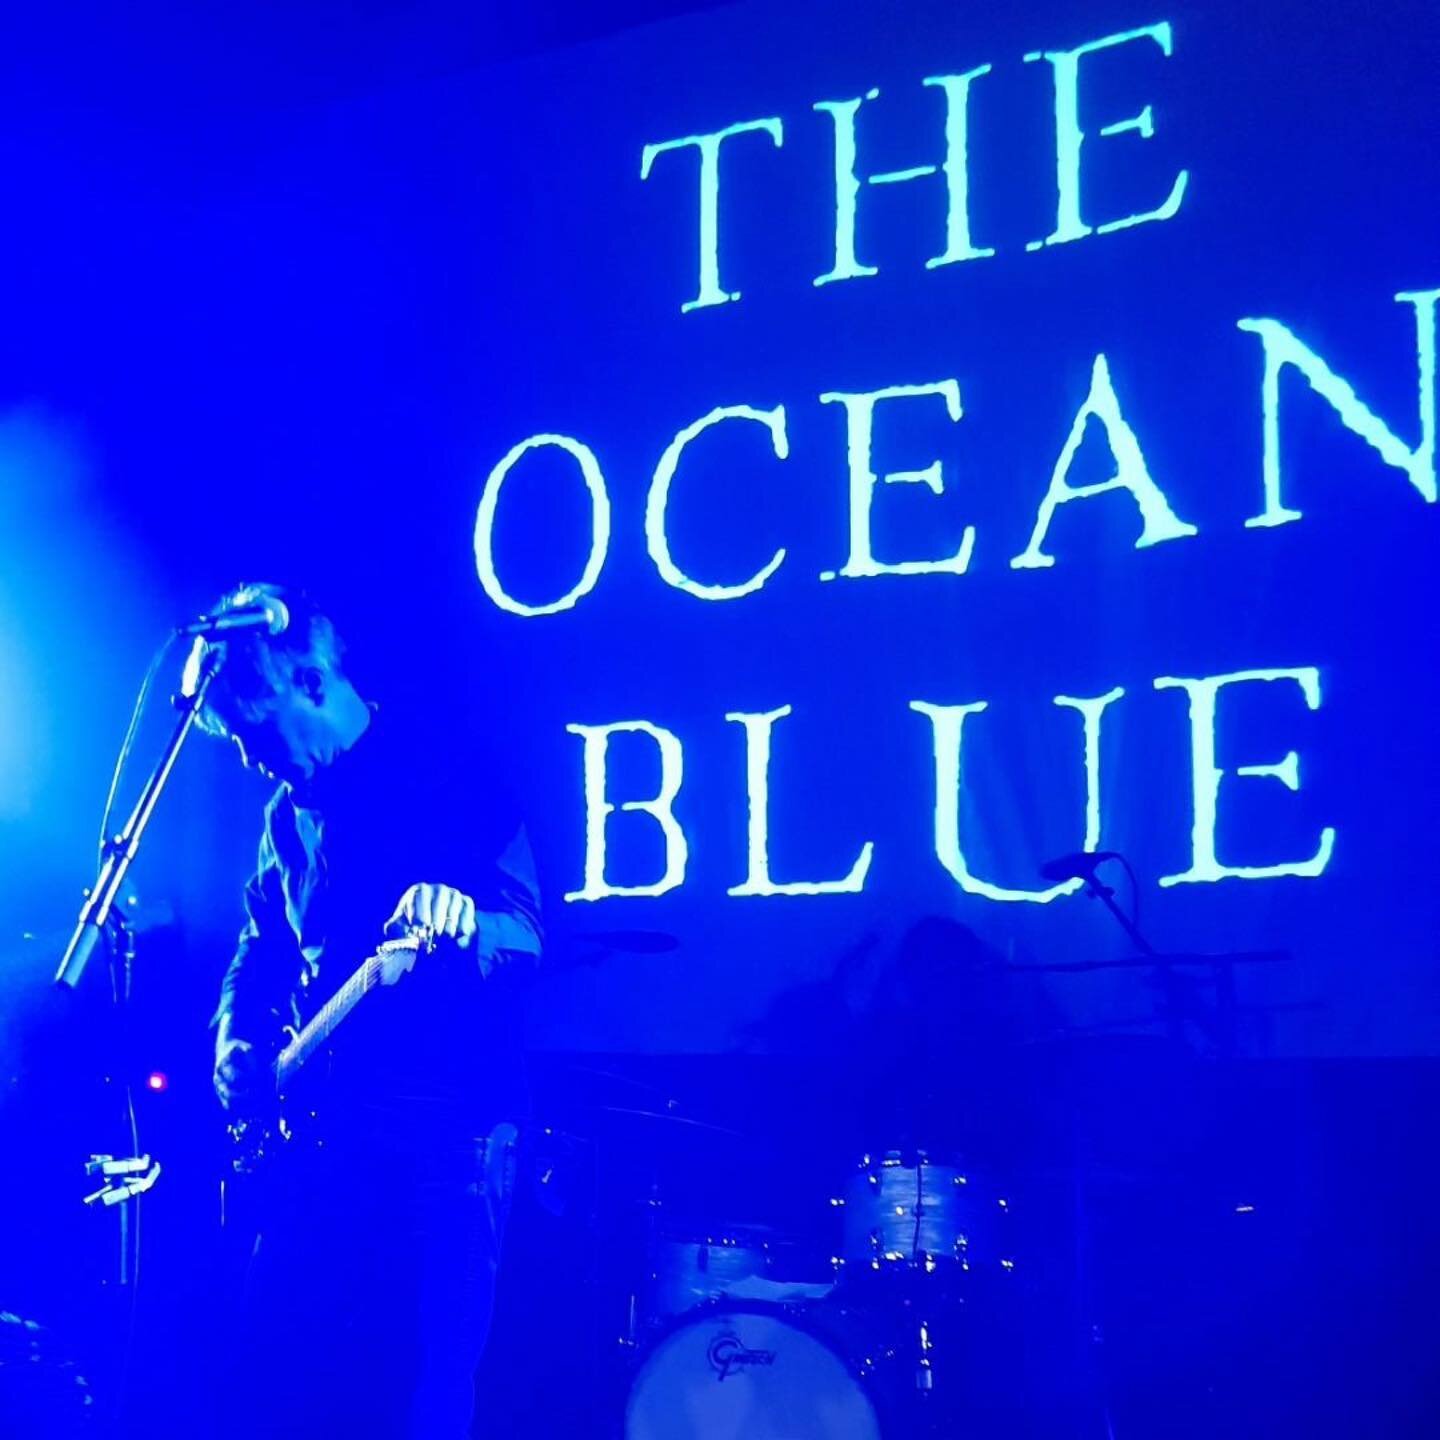 Our Bluer Waves Festival kicks off this Wed in Ventura CA @venturamusichall &amp; concludes Sat in Phoenix @crescentphx. Joining are @tallies.band @theasteroidno4 @chime.school @finechinatheband. Passes still available for Wed &amp; Sat. Thu &amp; Fr